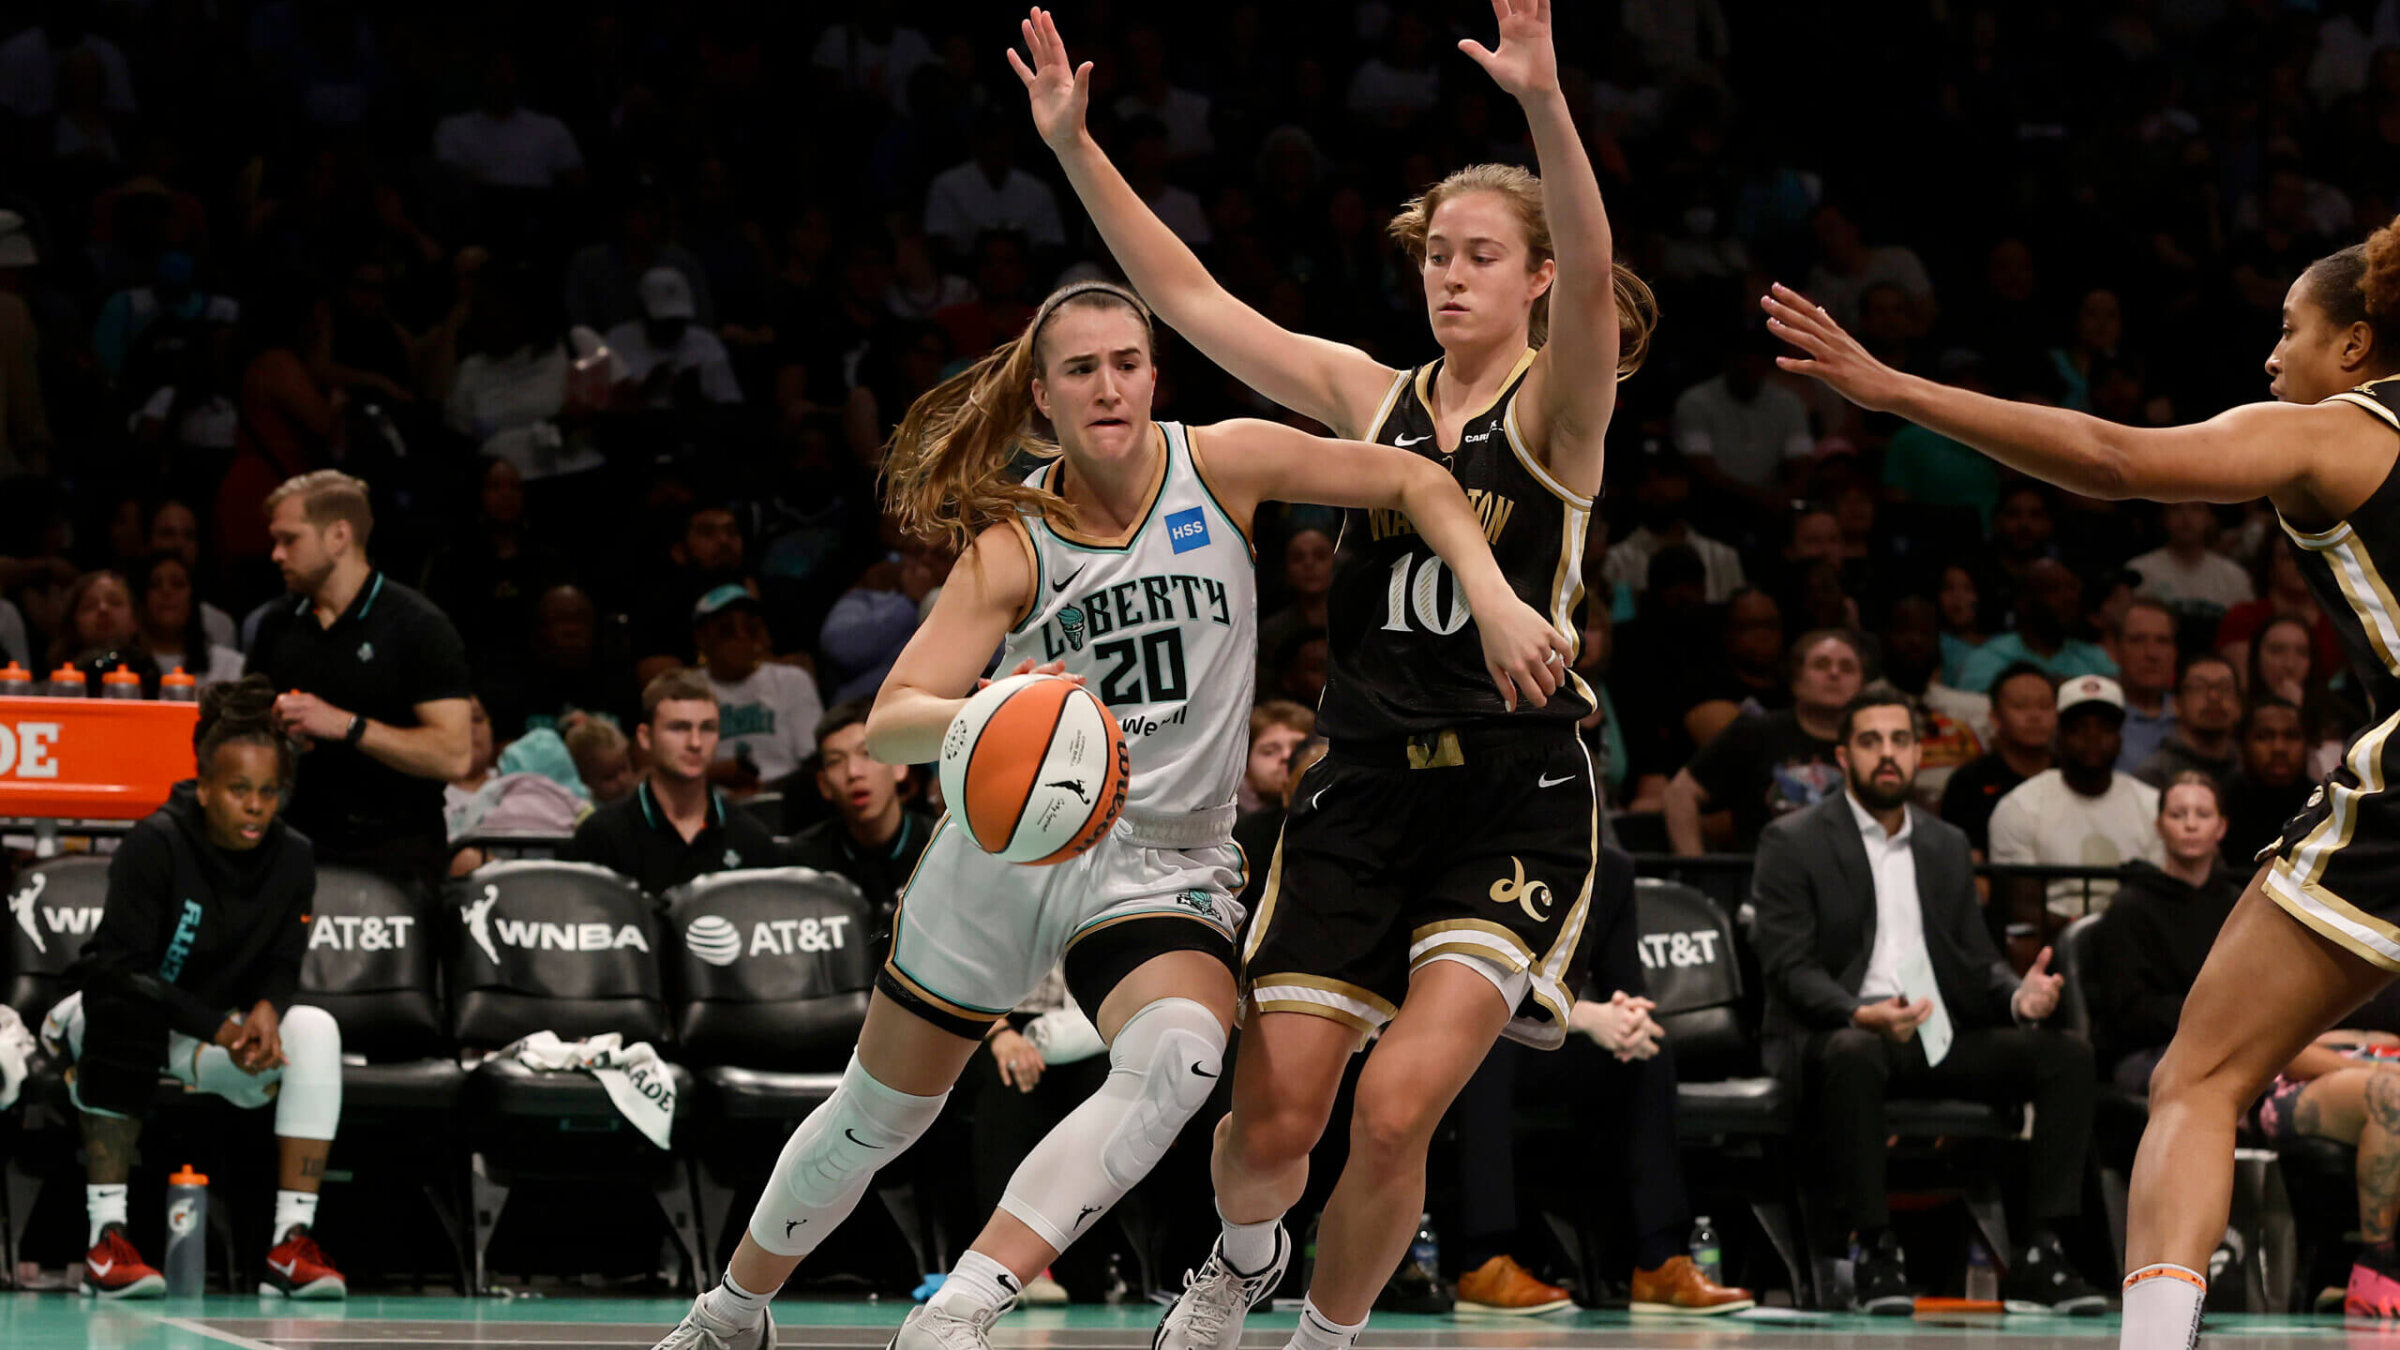 Abby Meyers defends Sabrina Ionescu of the New York Liberty in a June game in New York City. The Liberty defeated the Mystics in overtime, 89-88.